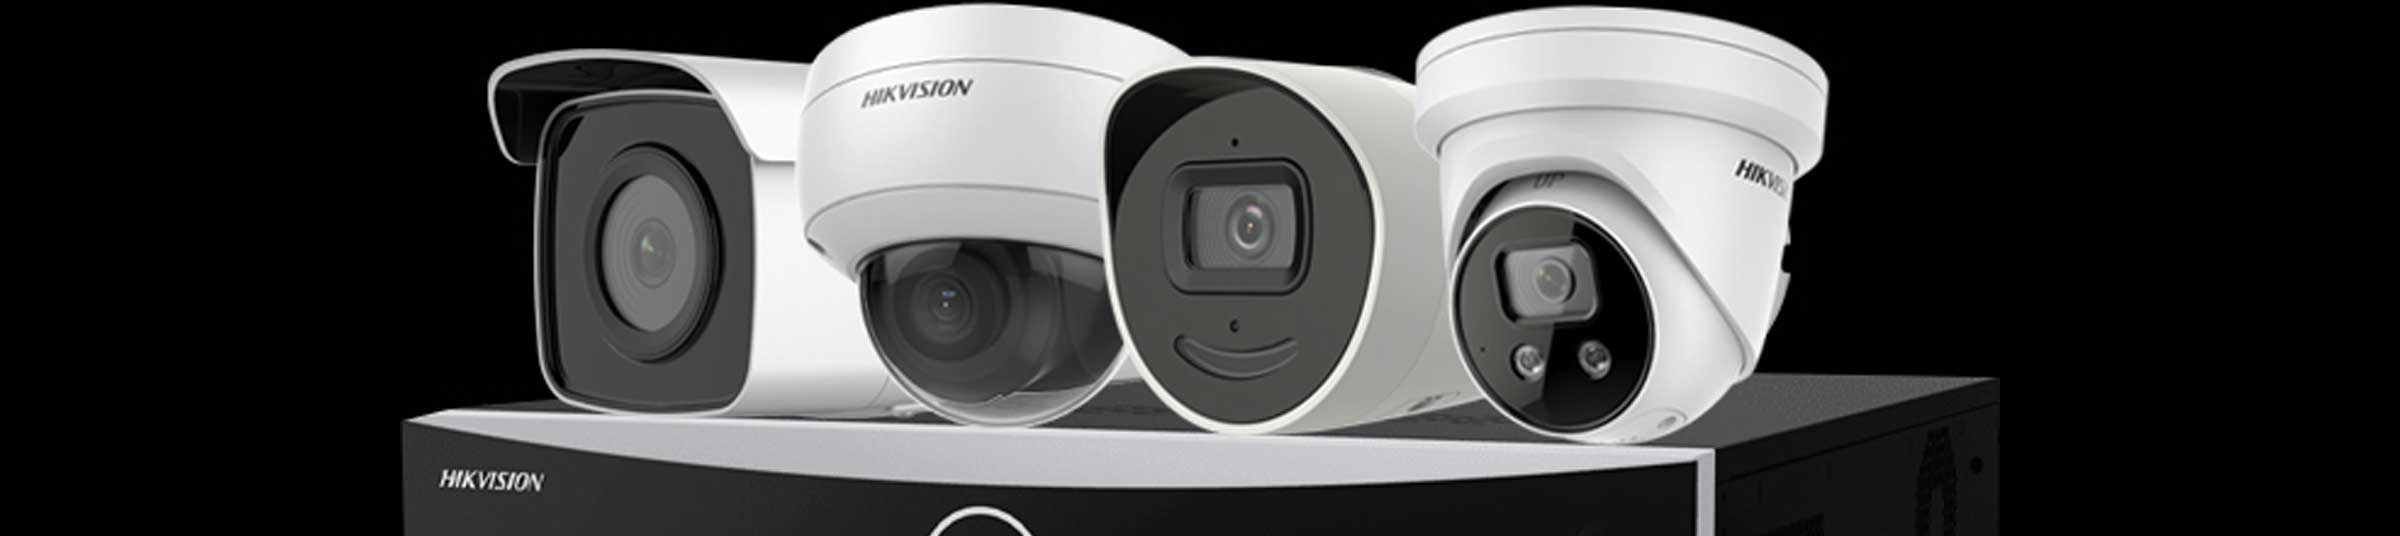 CCTV Security for your Home in Perth